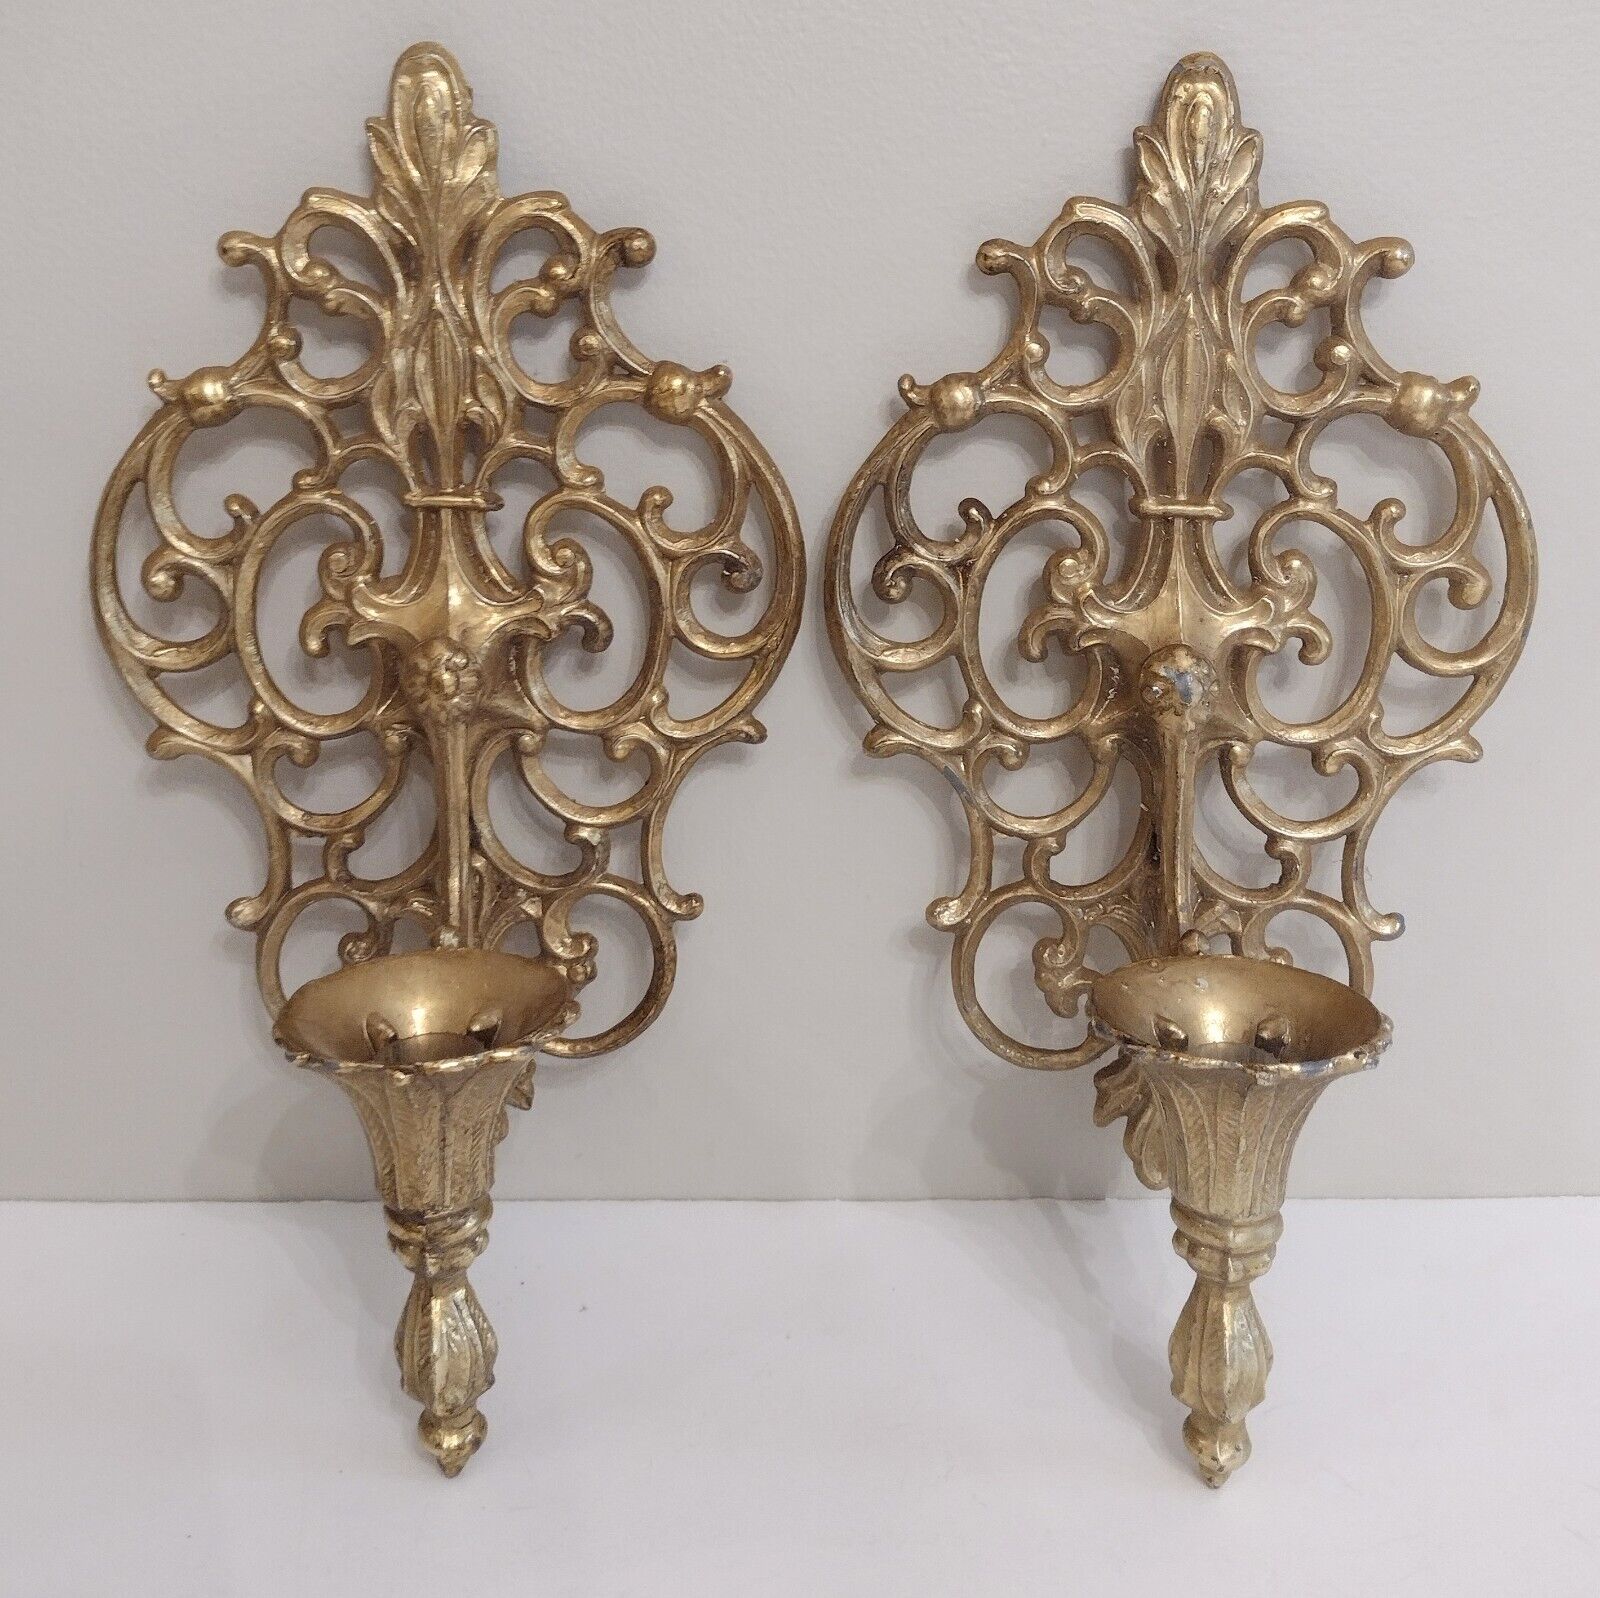 Vintage Pair Of Gold Gilt Metal Wall Sconces Candle Holders Hollywood Regency...